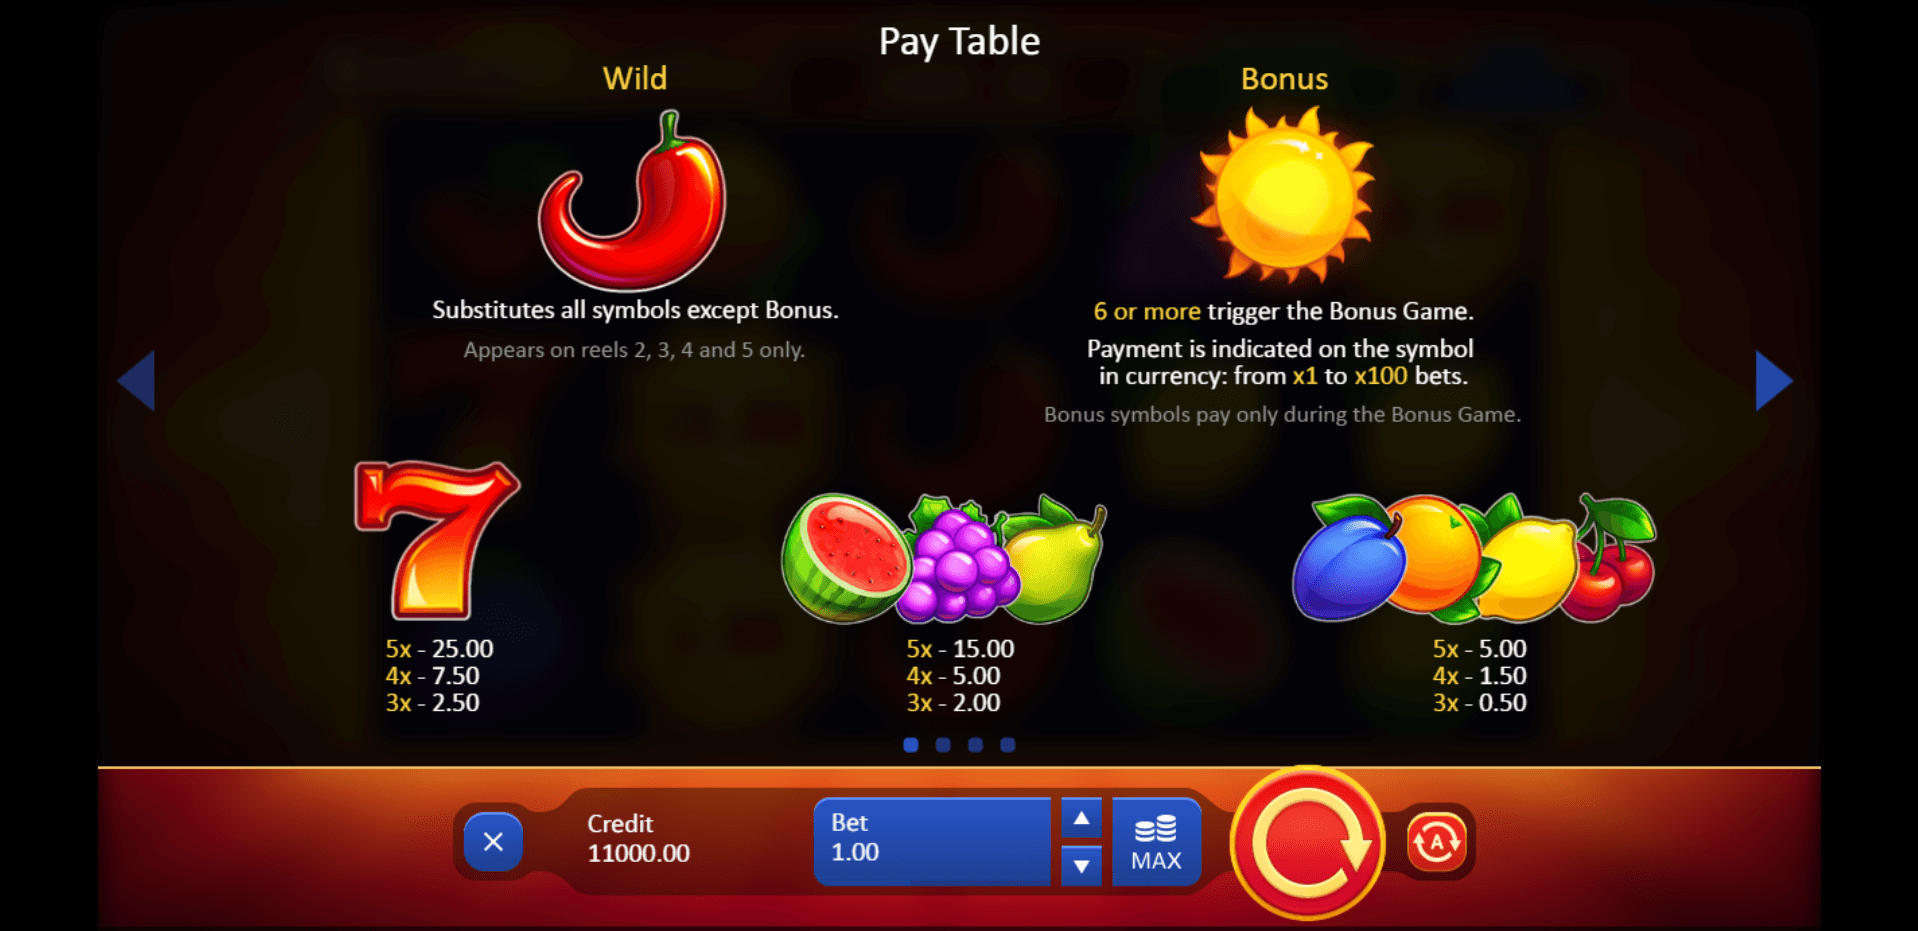 Sunny Fruits Hold And Win Slot Machine